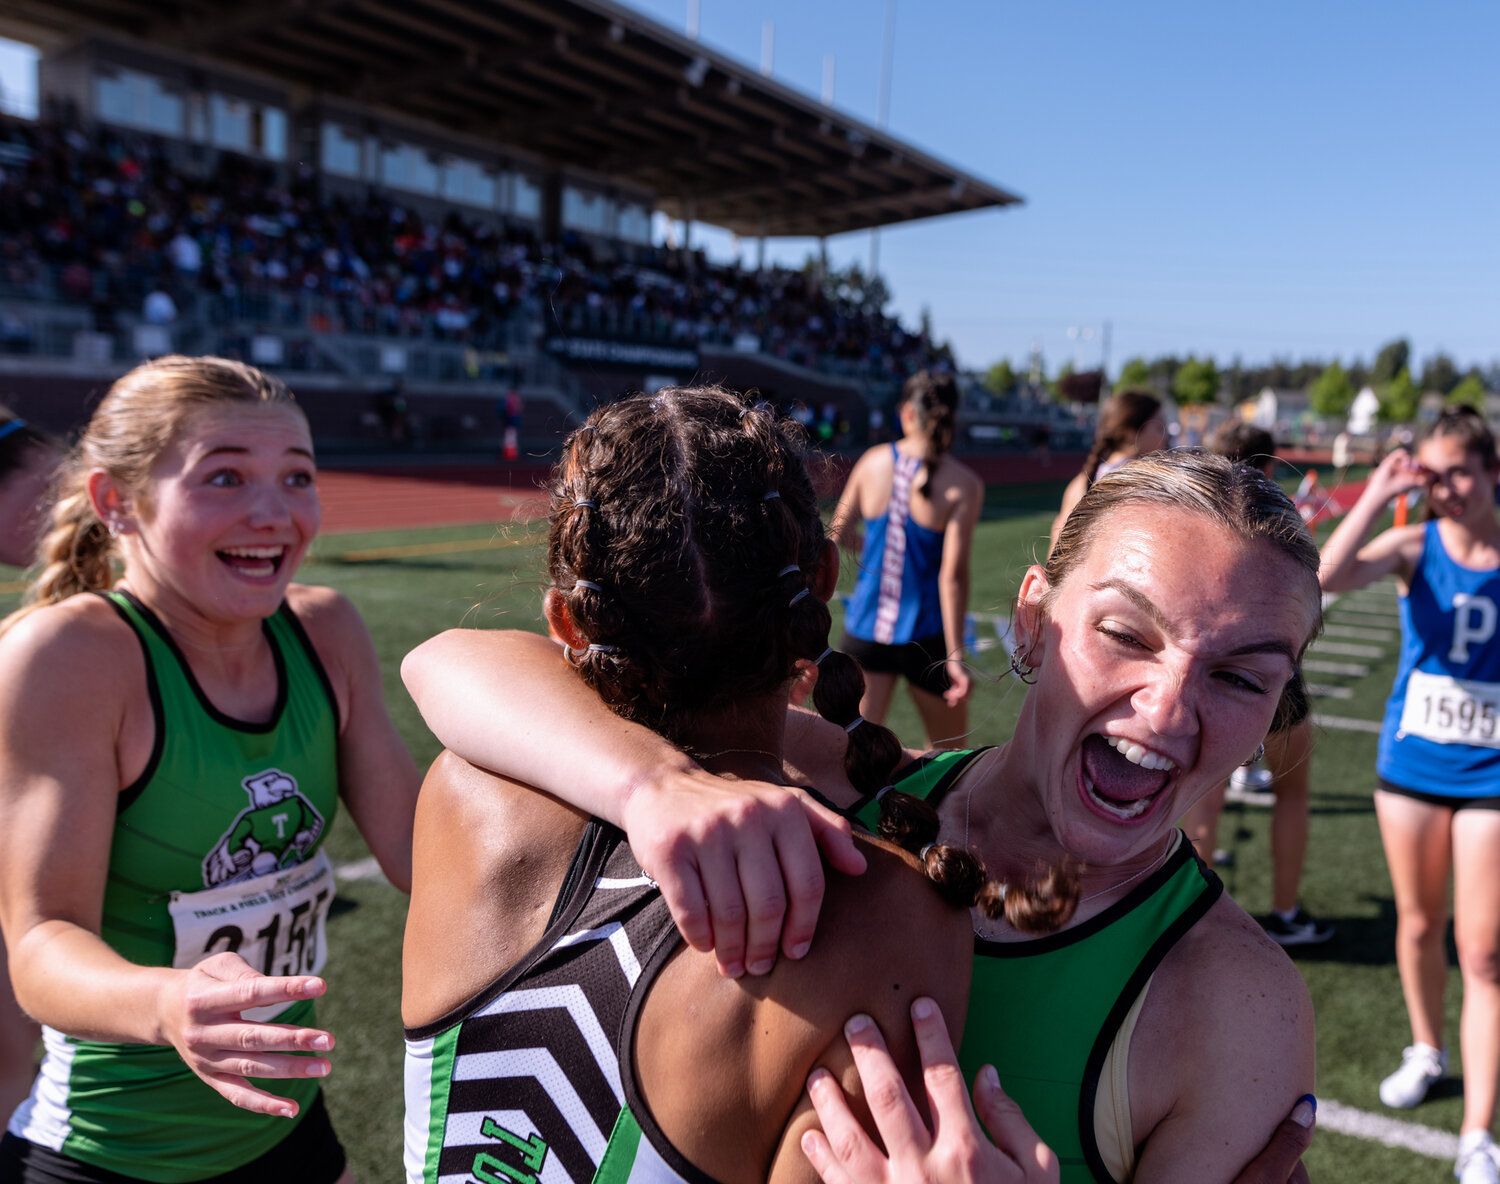 Tumwater’s Reese Heryford hugs Ava Jones in excitement of winning the 2A girls team title following their victory in the 4x400 relay at the WIAA 2A/3A/4A State Track and Field Championships on Saturday, May 27, 2023, at Mount Tahoma High School in Tacoma. (Joshua Hart/For The Chronicle)